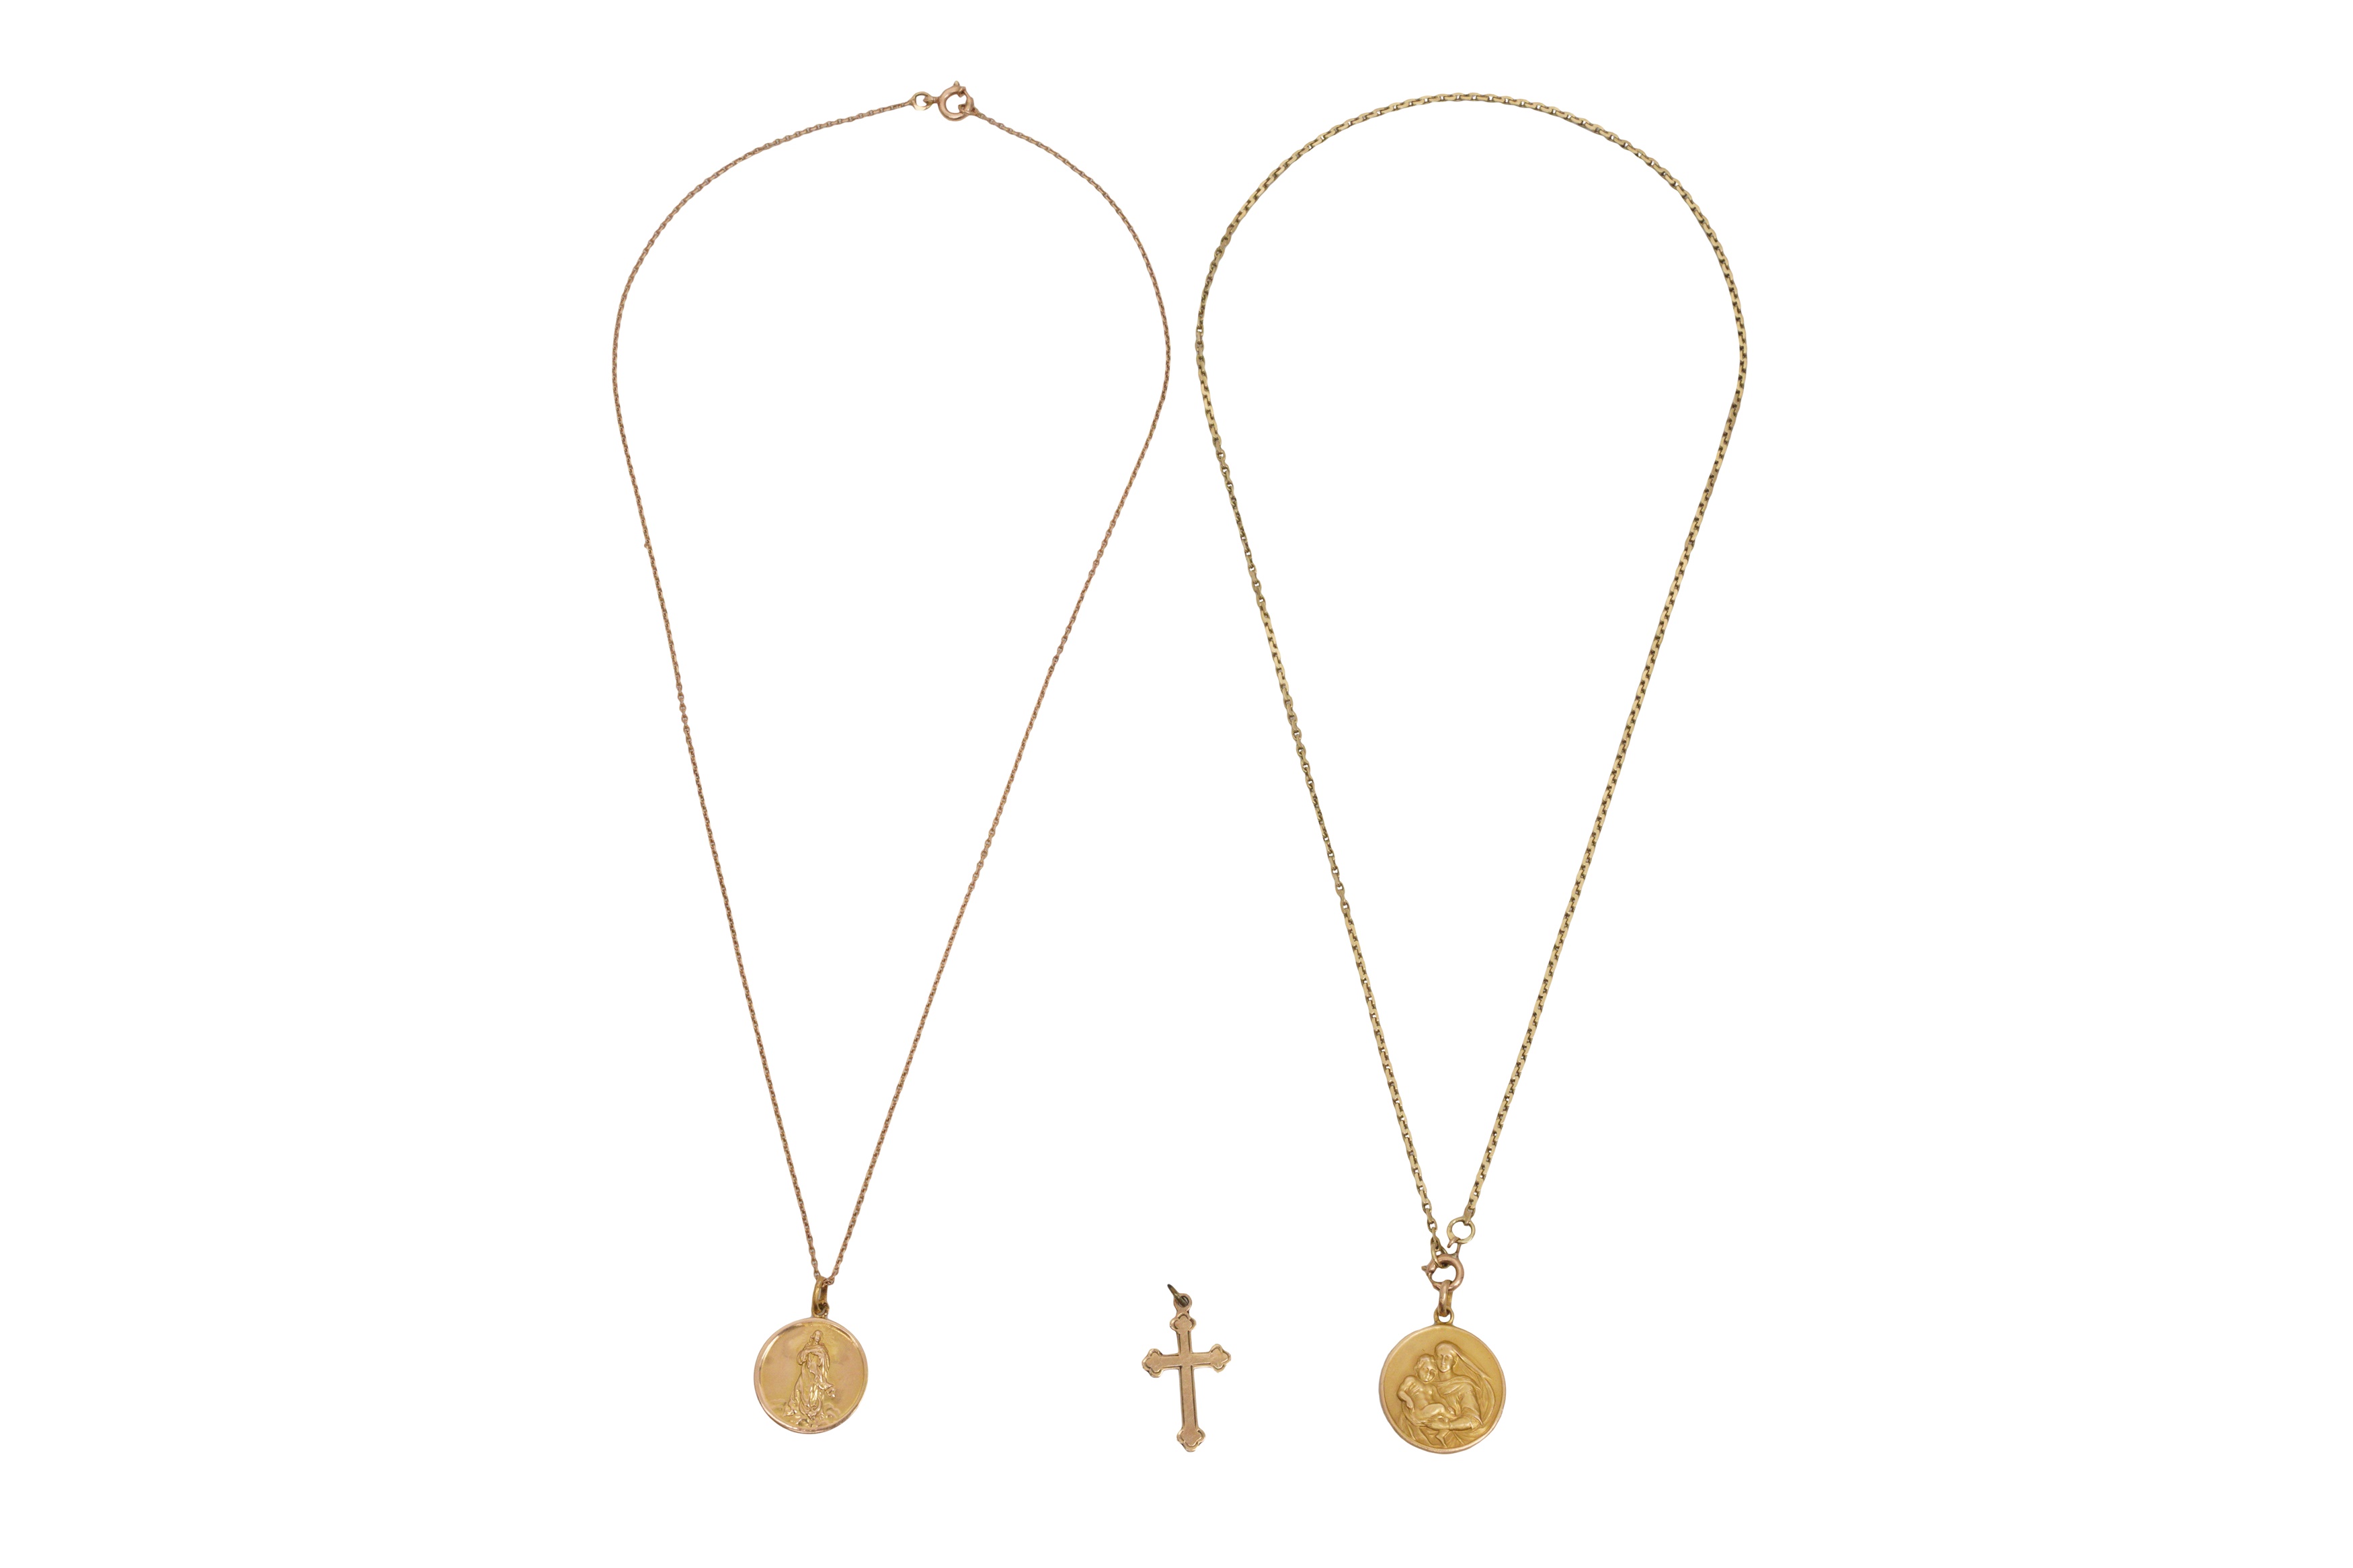 TWO RELIGIOUS PENDANT NECKLACES AND A CROSS - Image 2 of 2